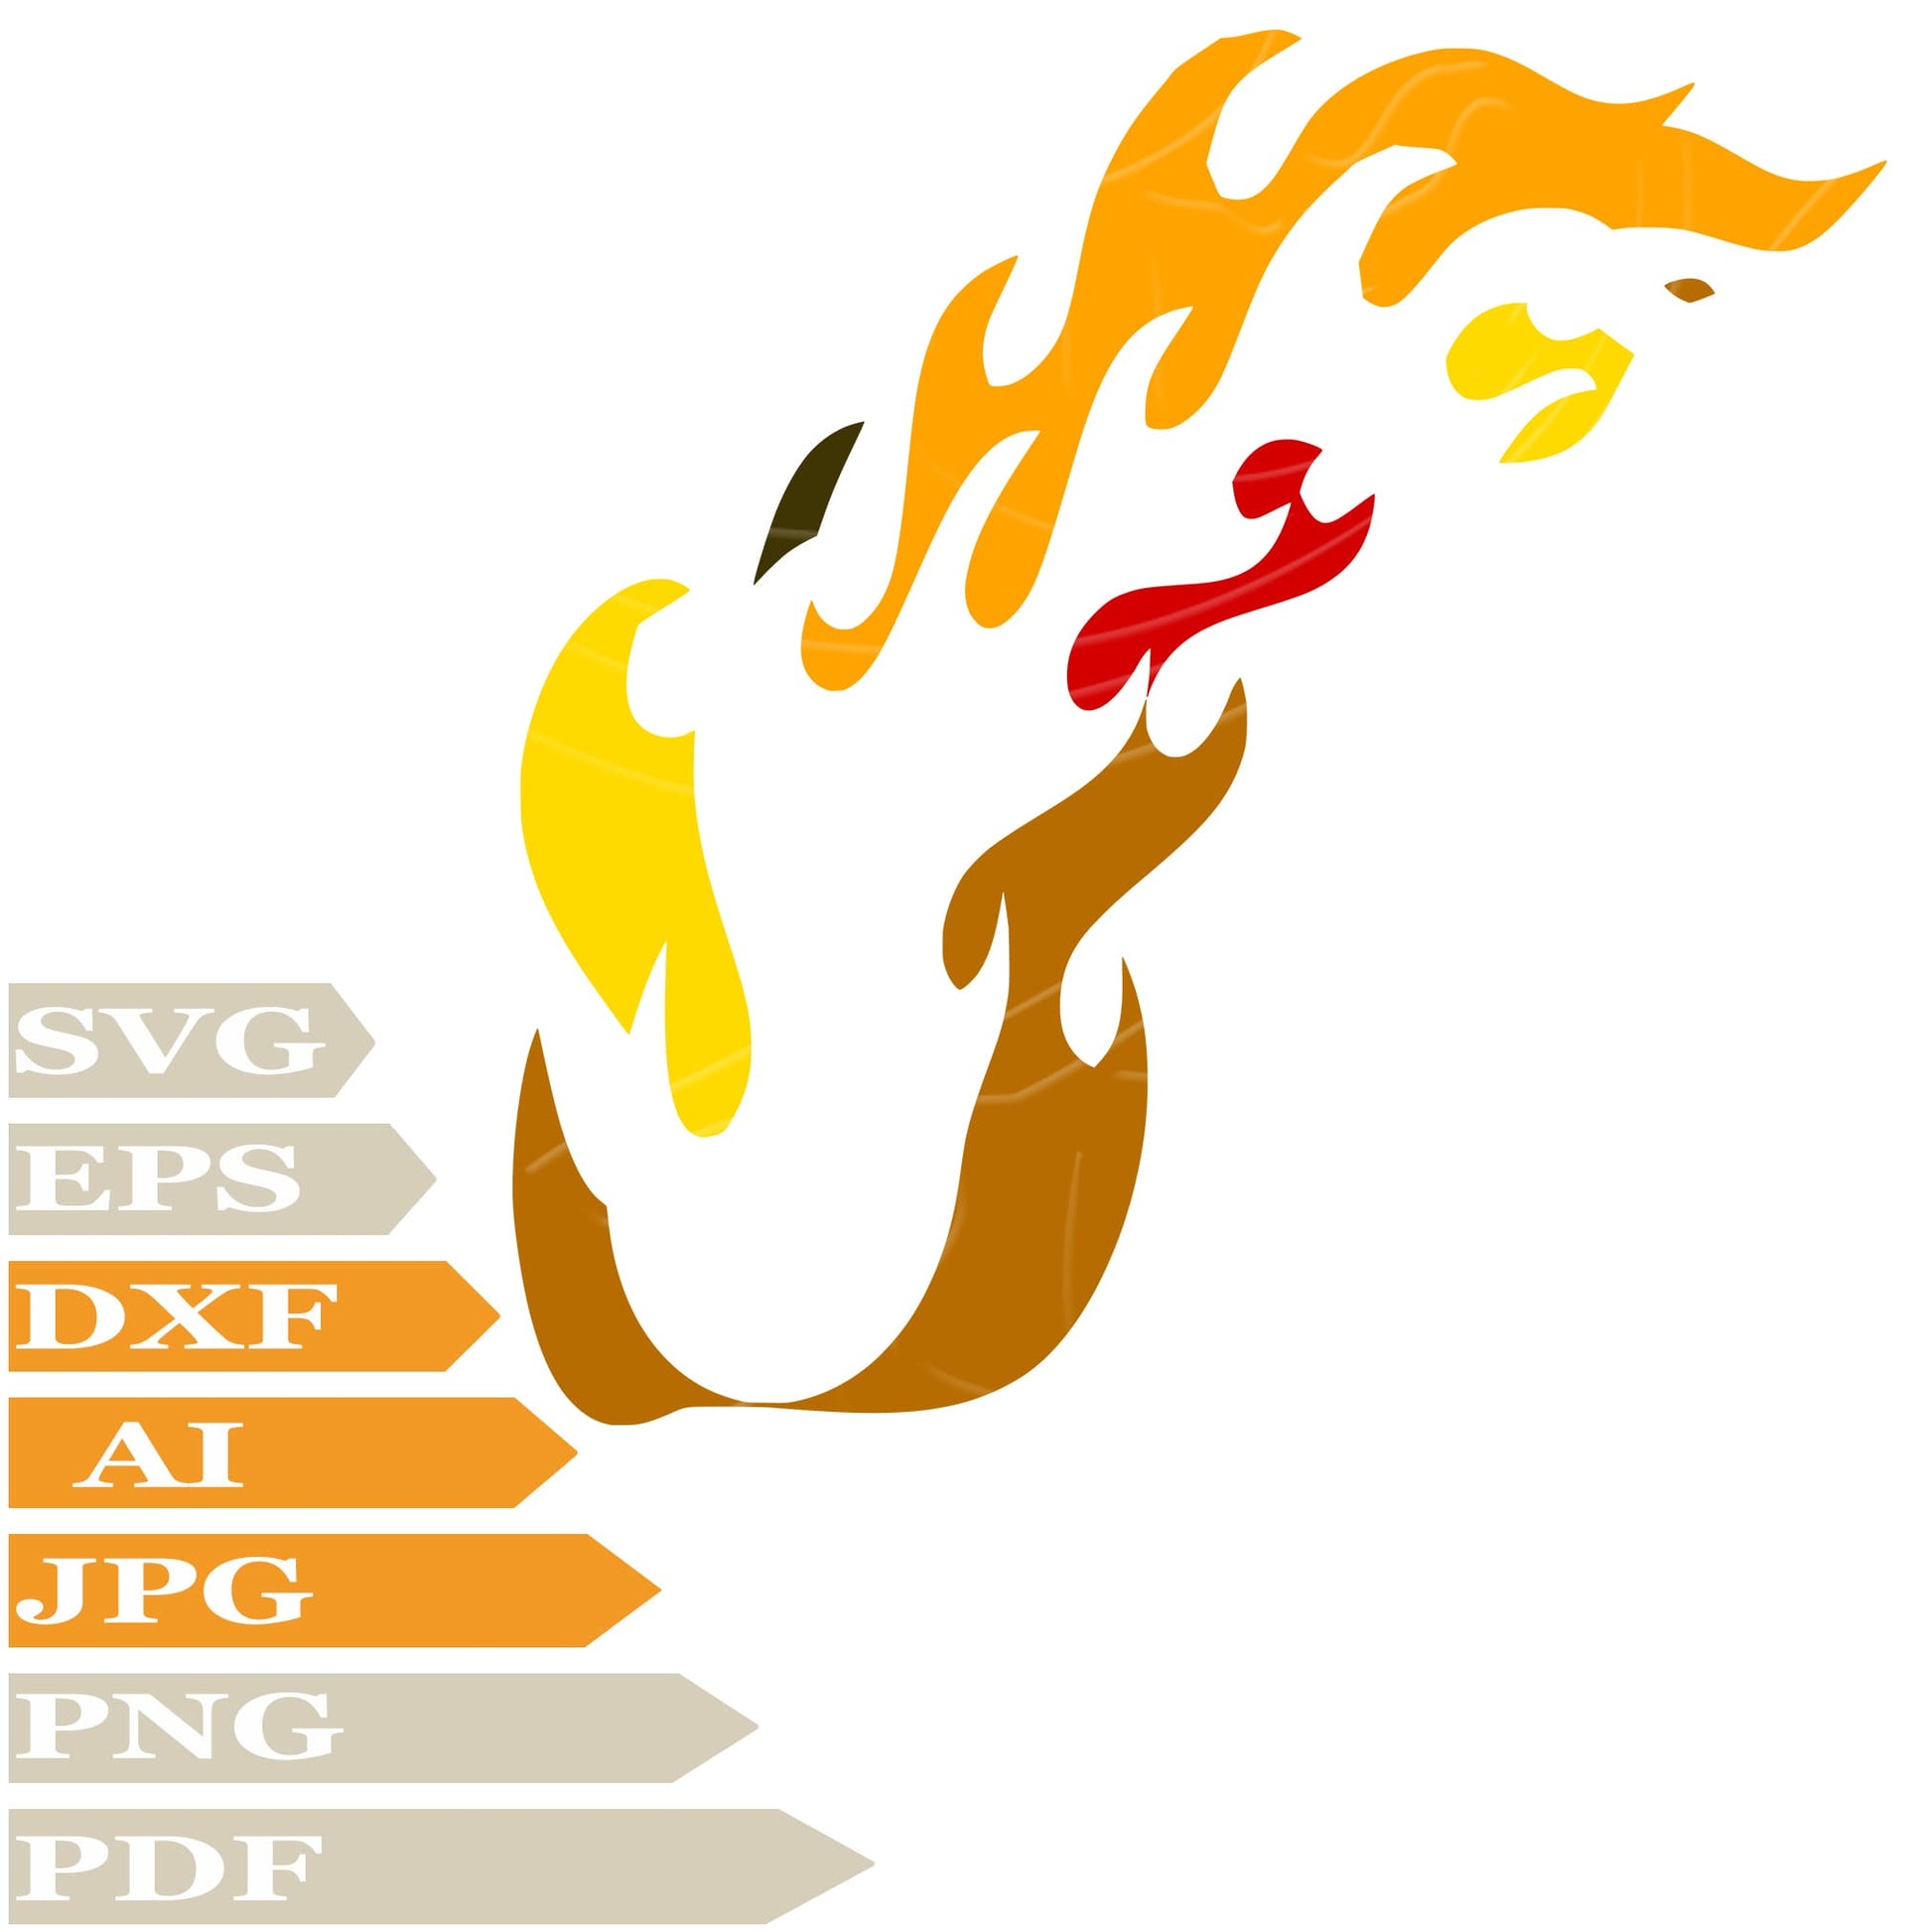 Fire SVG, Flame Of Fire SVG Design, Flame Of Fire PNG, Fire Vector Graphics, Fire Digital Instant Download, Flame Of Fire For Cricut, Clip Art, Cut File, T-Shirts, Silhouette